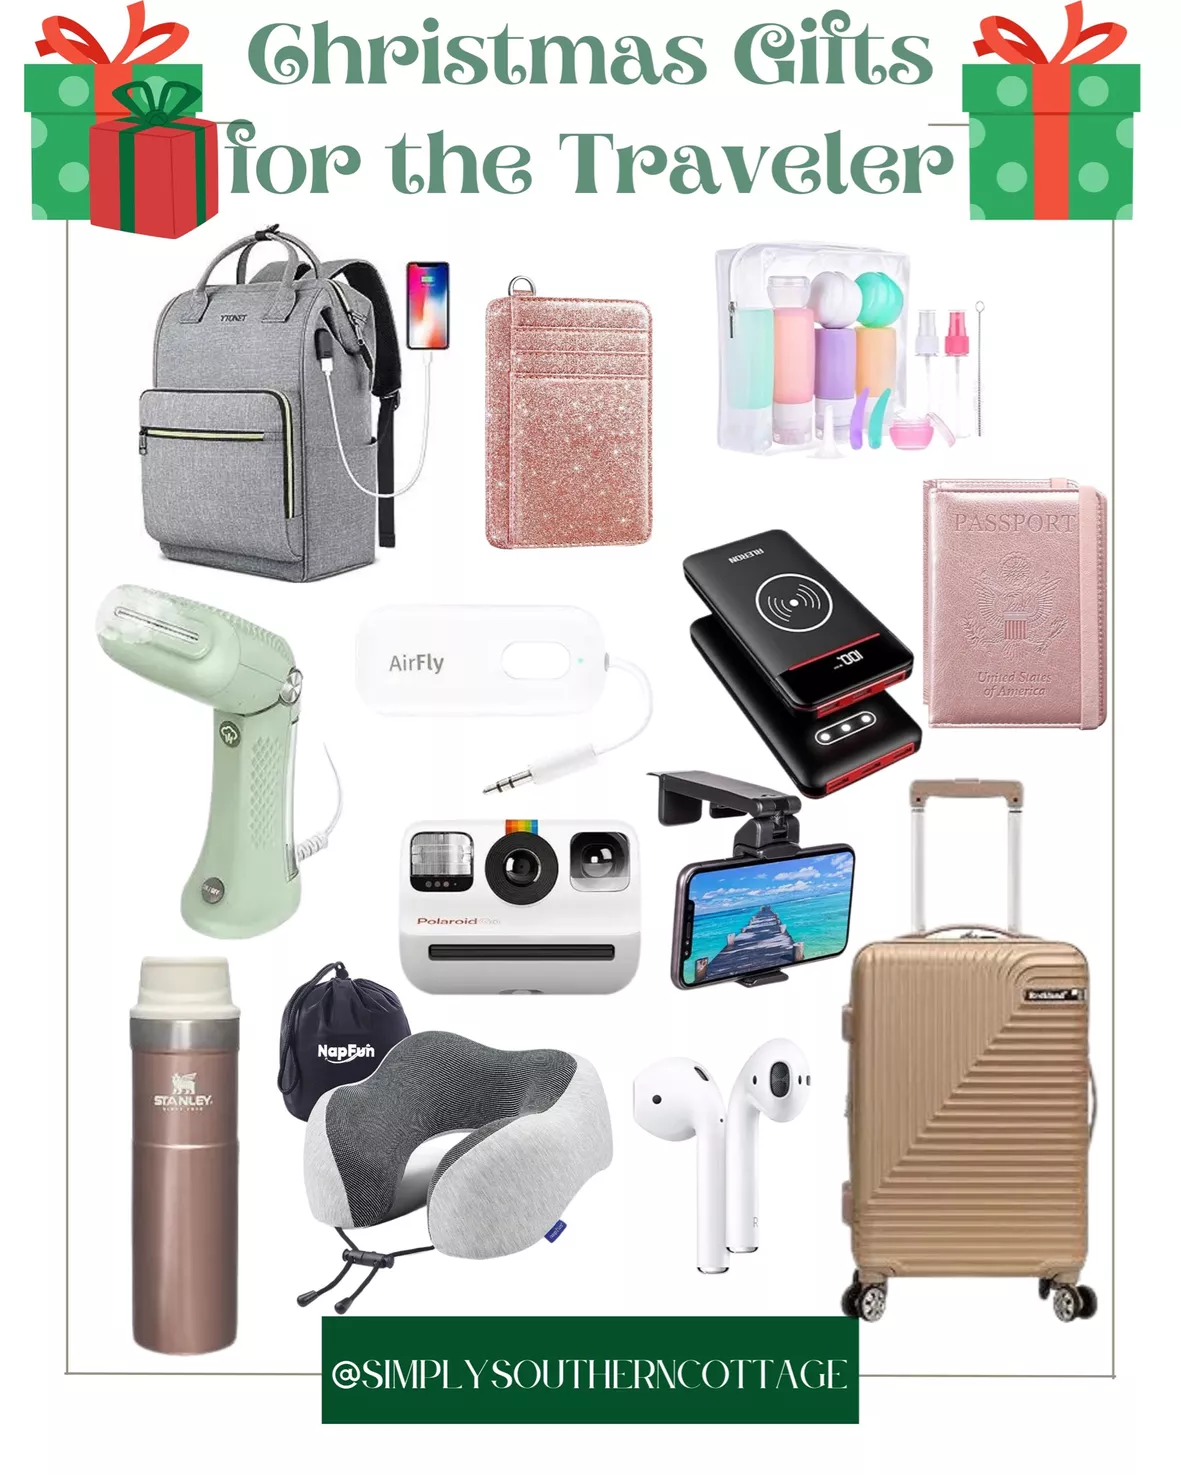 Gift Guide: The Traveler - What to Buy Someone Who Travels a Lot